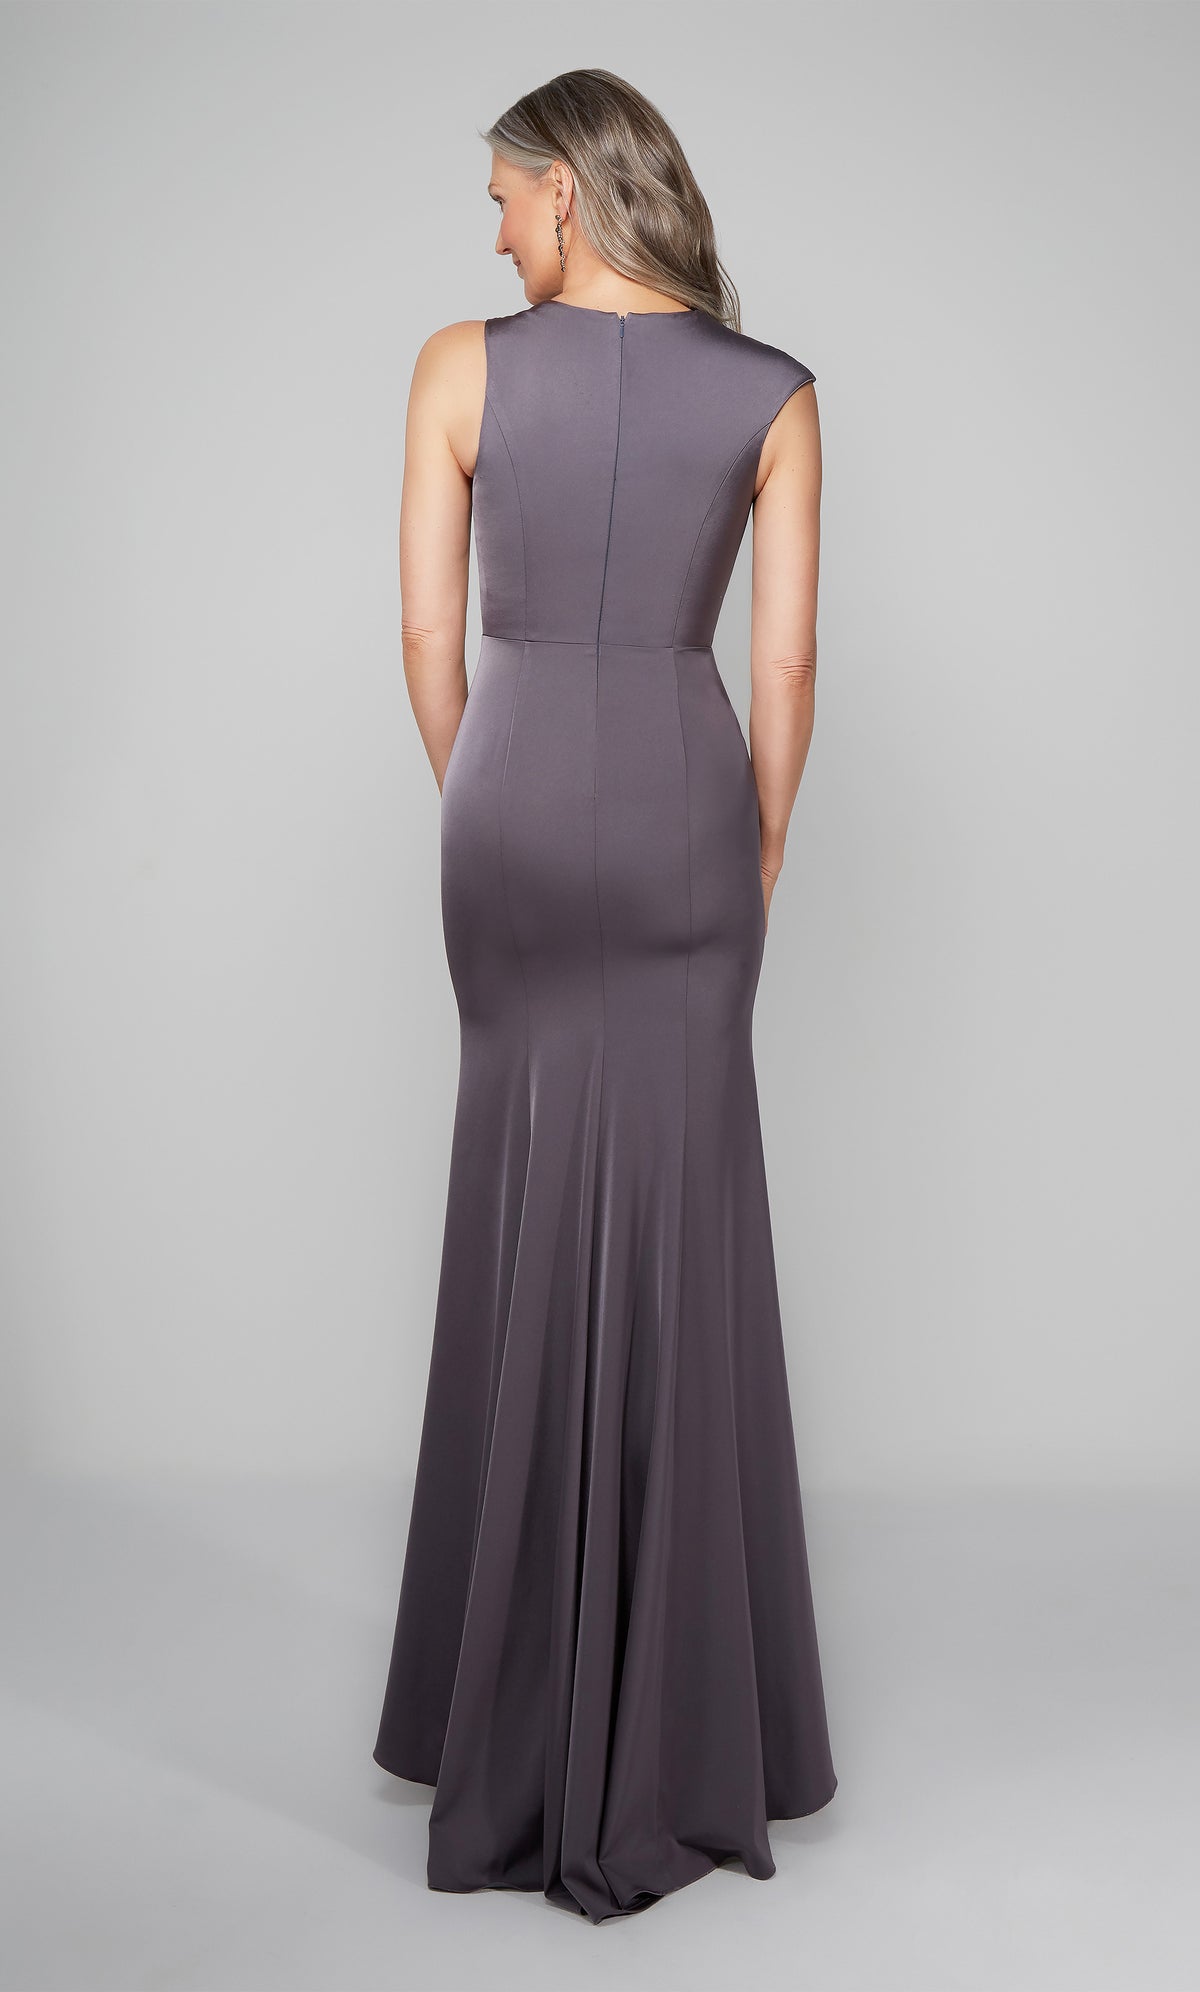 Simple mother of the bride dress with a close back in graphite color.